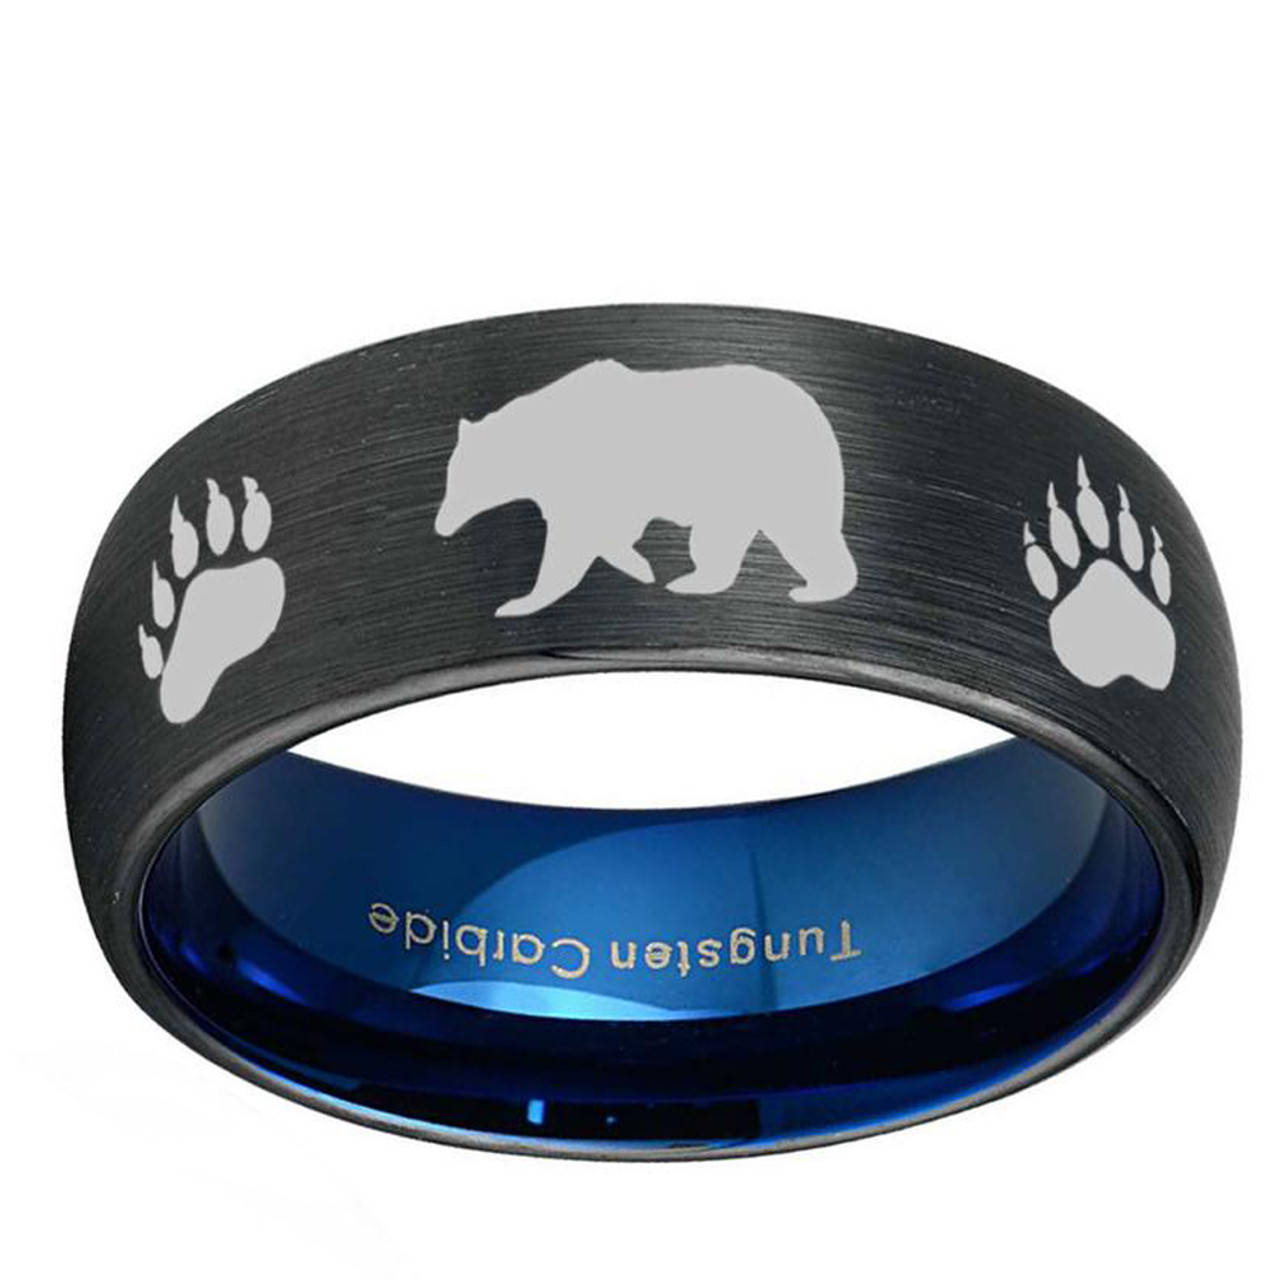 (8mm)  Unisex or Men's Hunting Ring / Bear Crossing Wedding ring band. Black Tungsten Carbide Band with Bear Walking and Paw Prints Laser Design. Domed Top Inner Blue Hunter's Wedding ring band Comfort Fit Ring